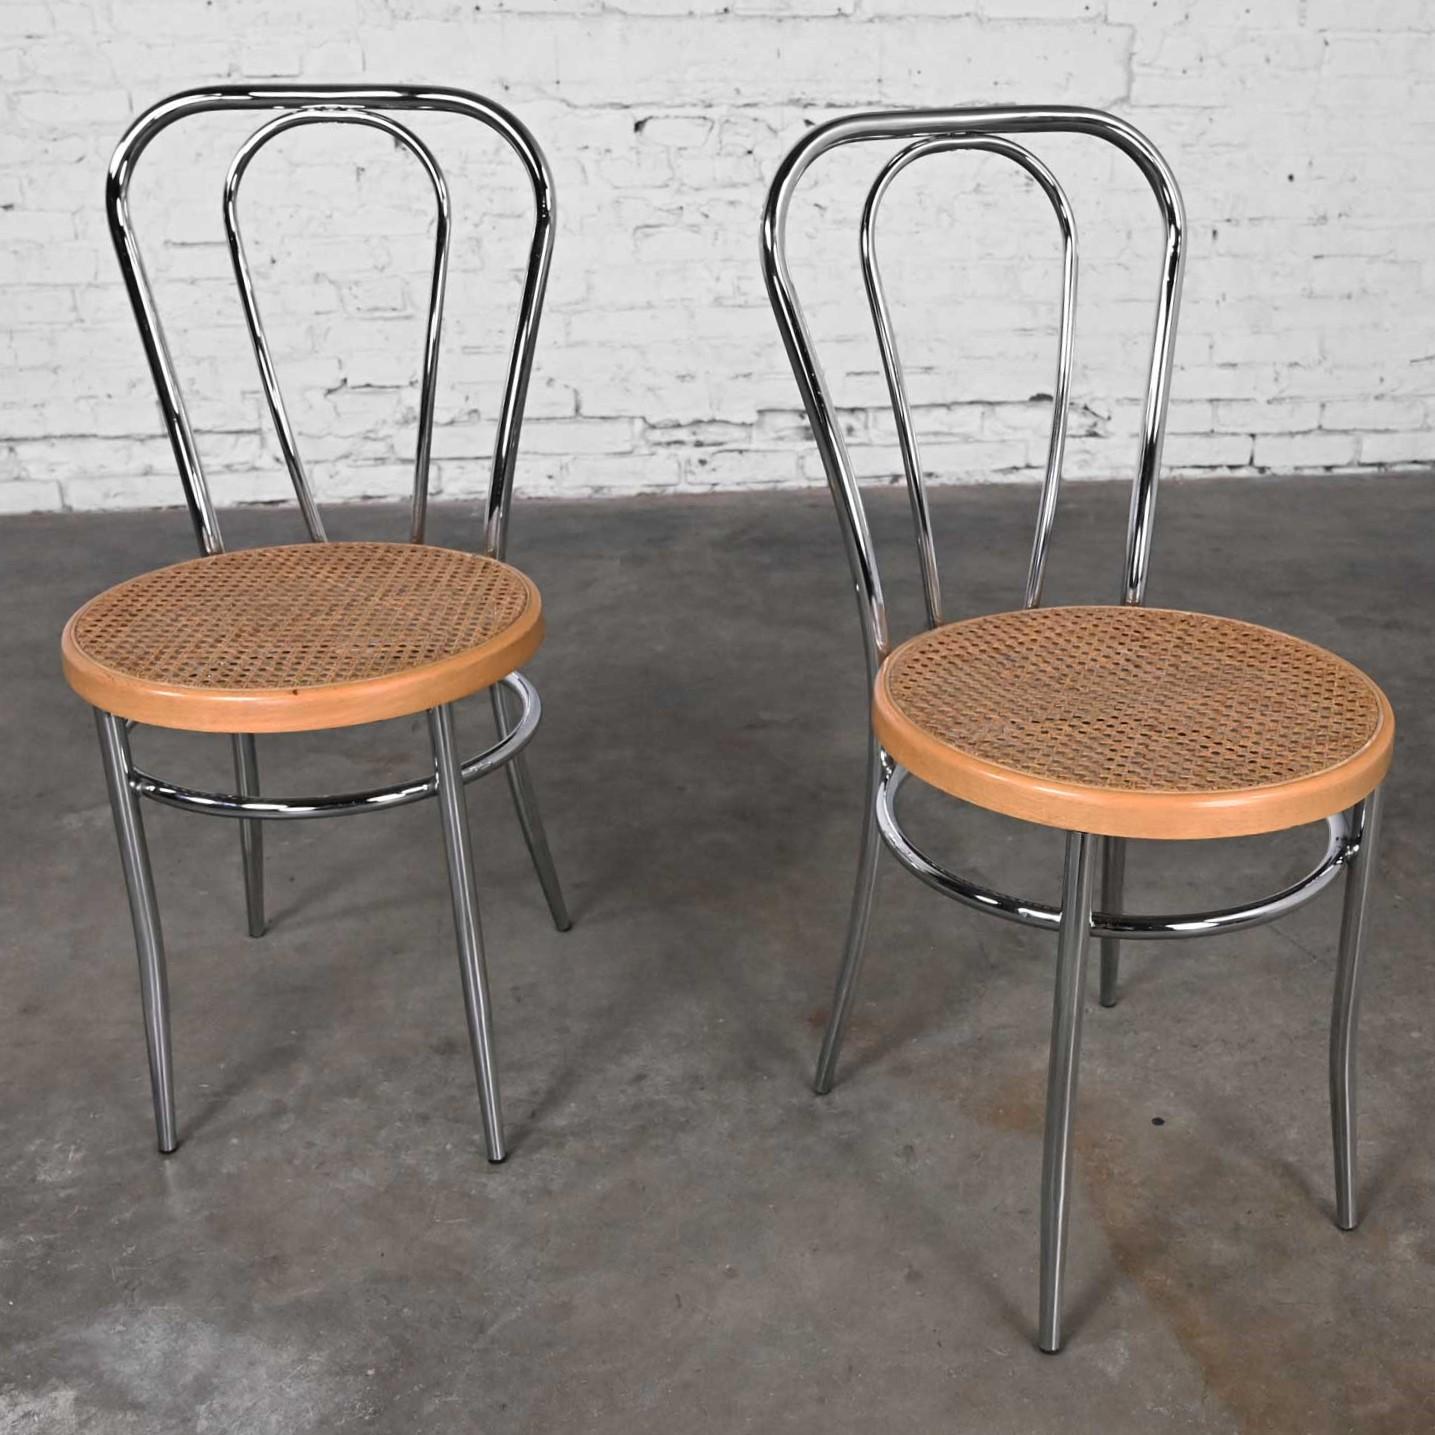 Pair Made Italy Bauhaus Style Bistro Café Chairs Chrome Cane Seat after Thonet en vente 10